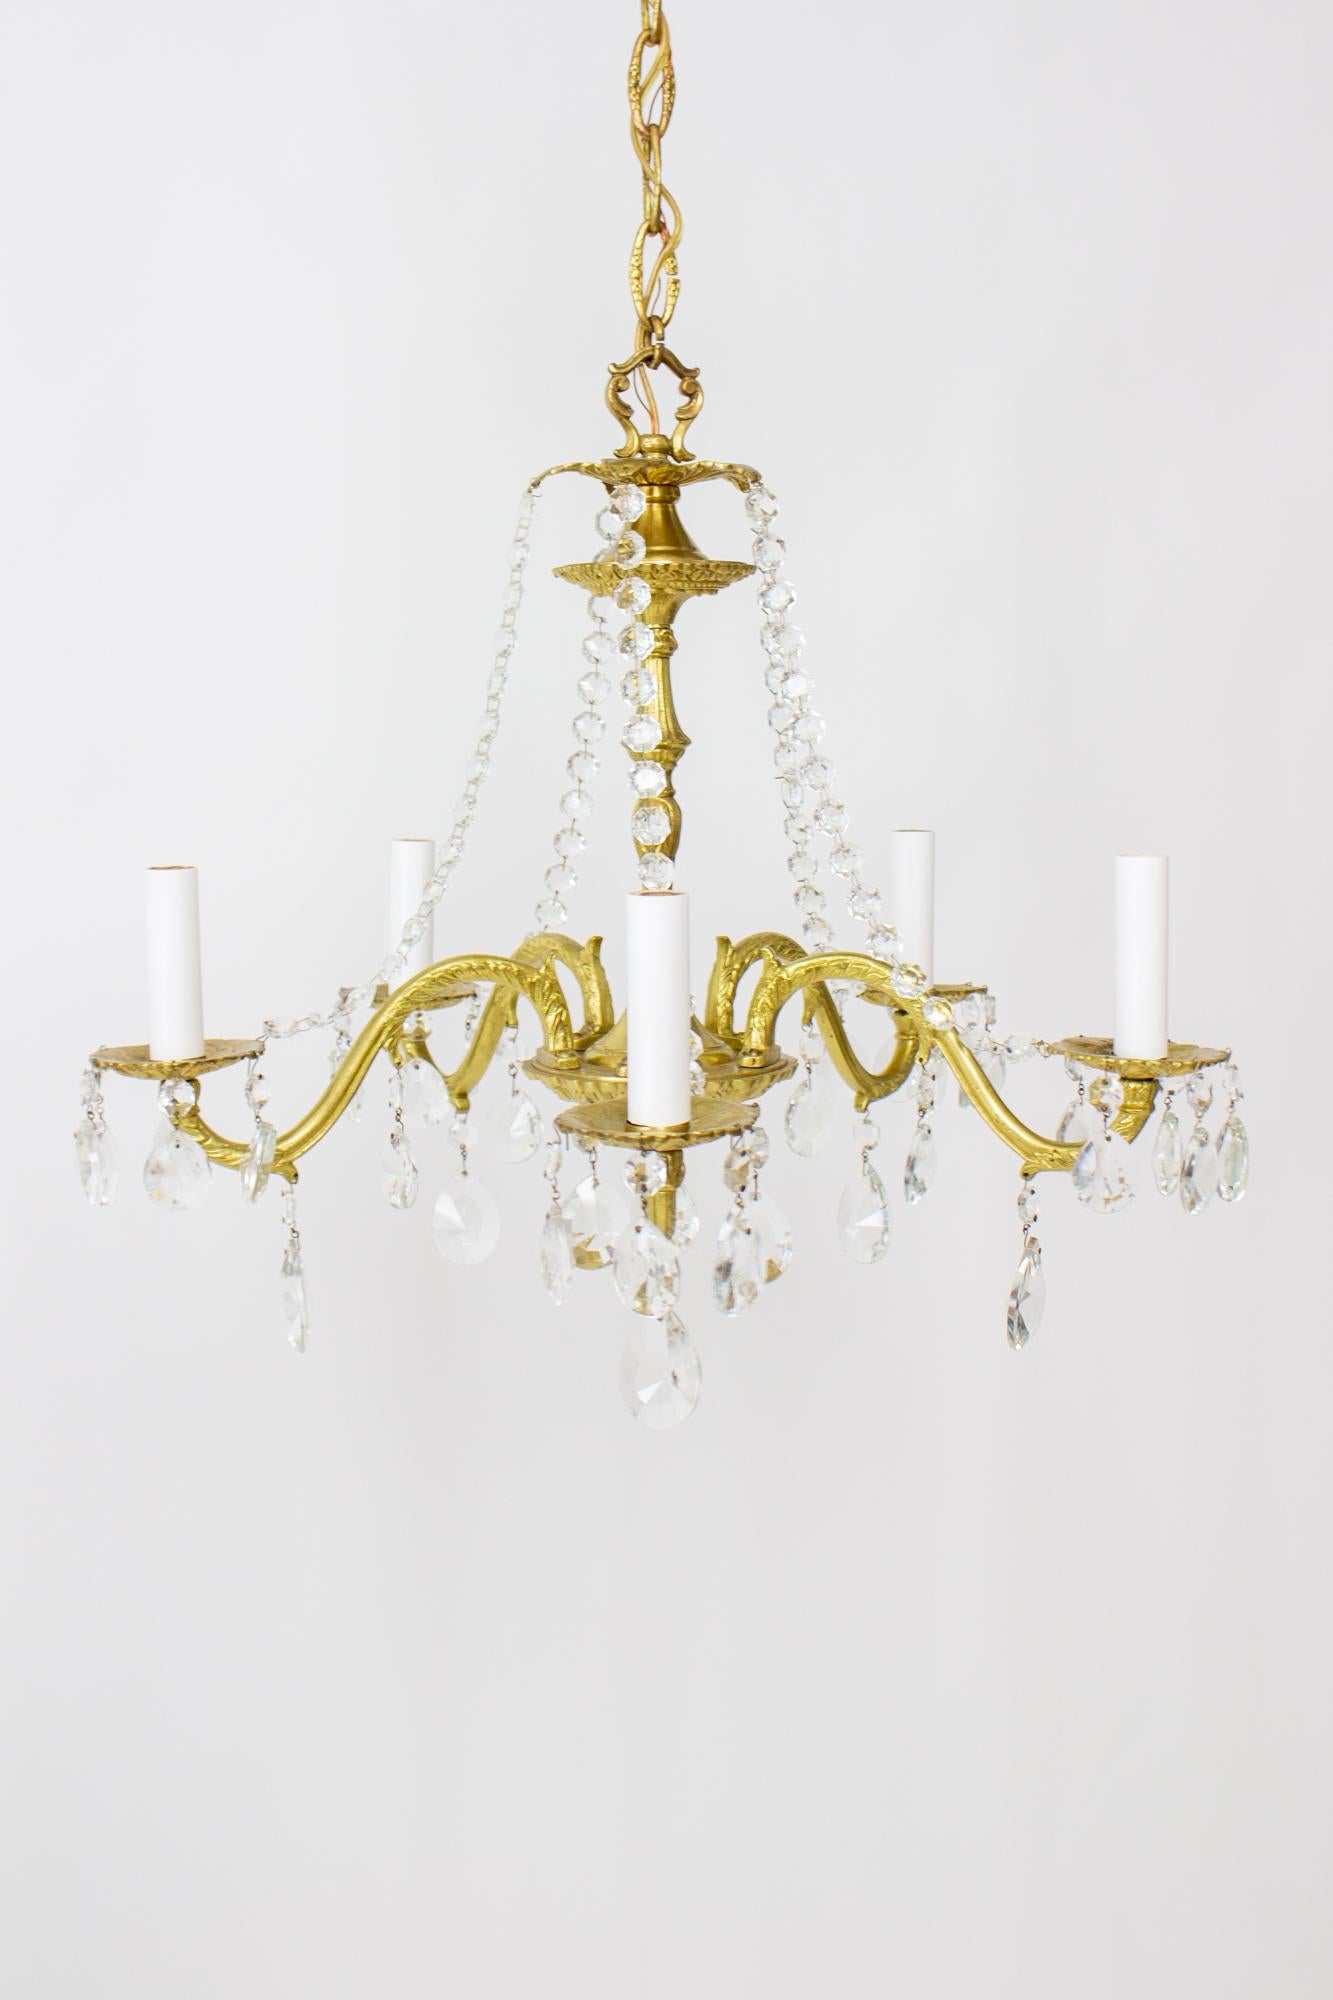 Mid-20th Century Five Arm Spanish Cast Brass and Crystal Chandelier For Sale 3